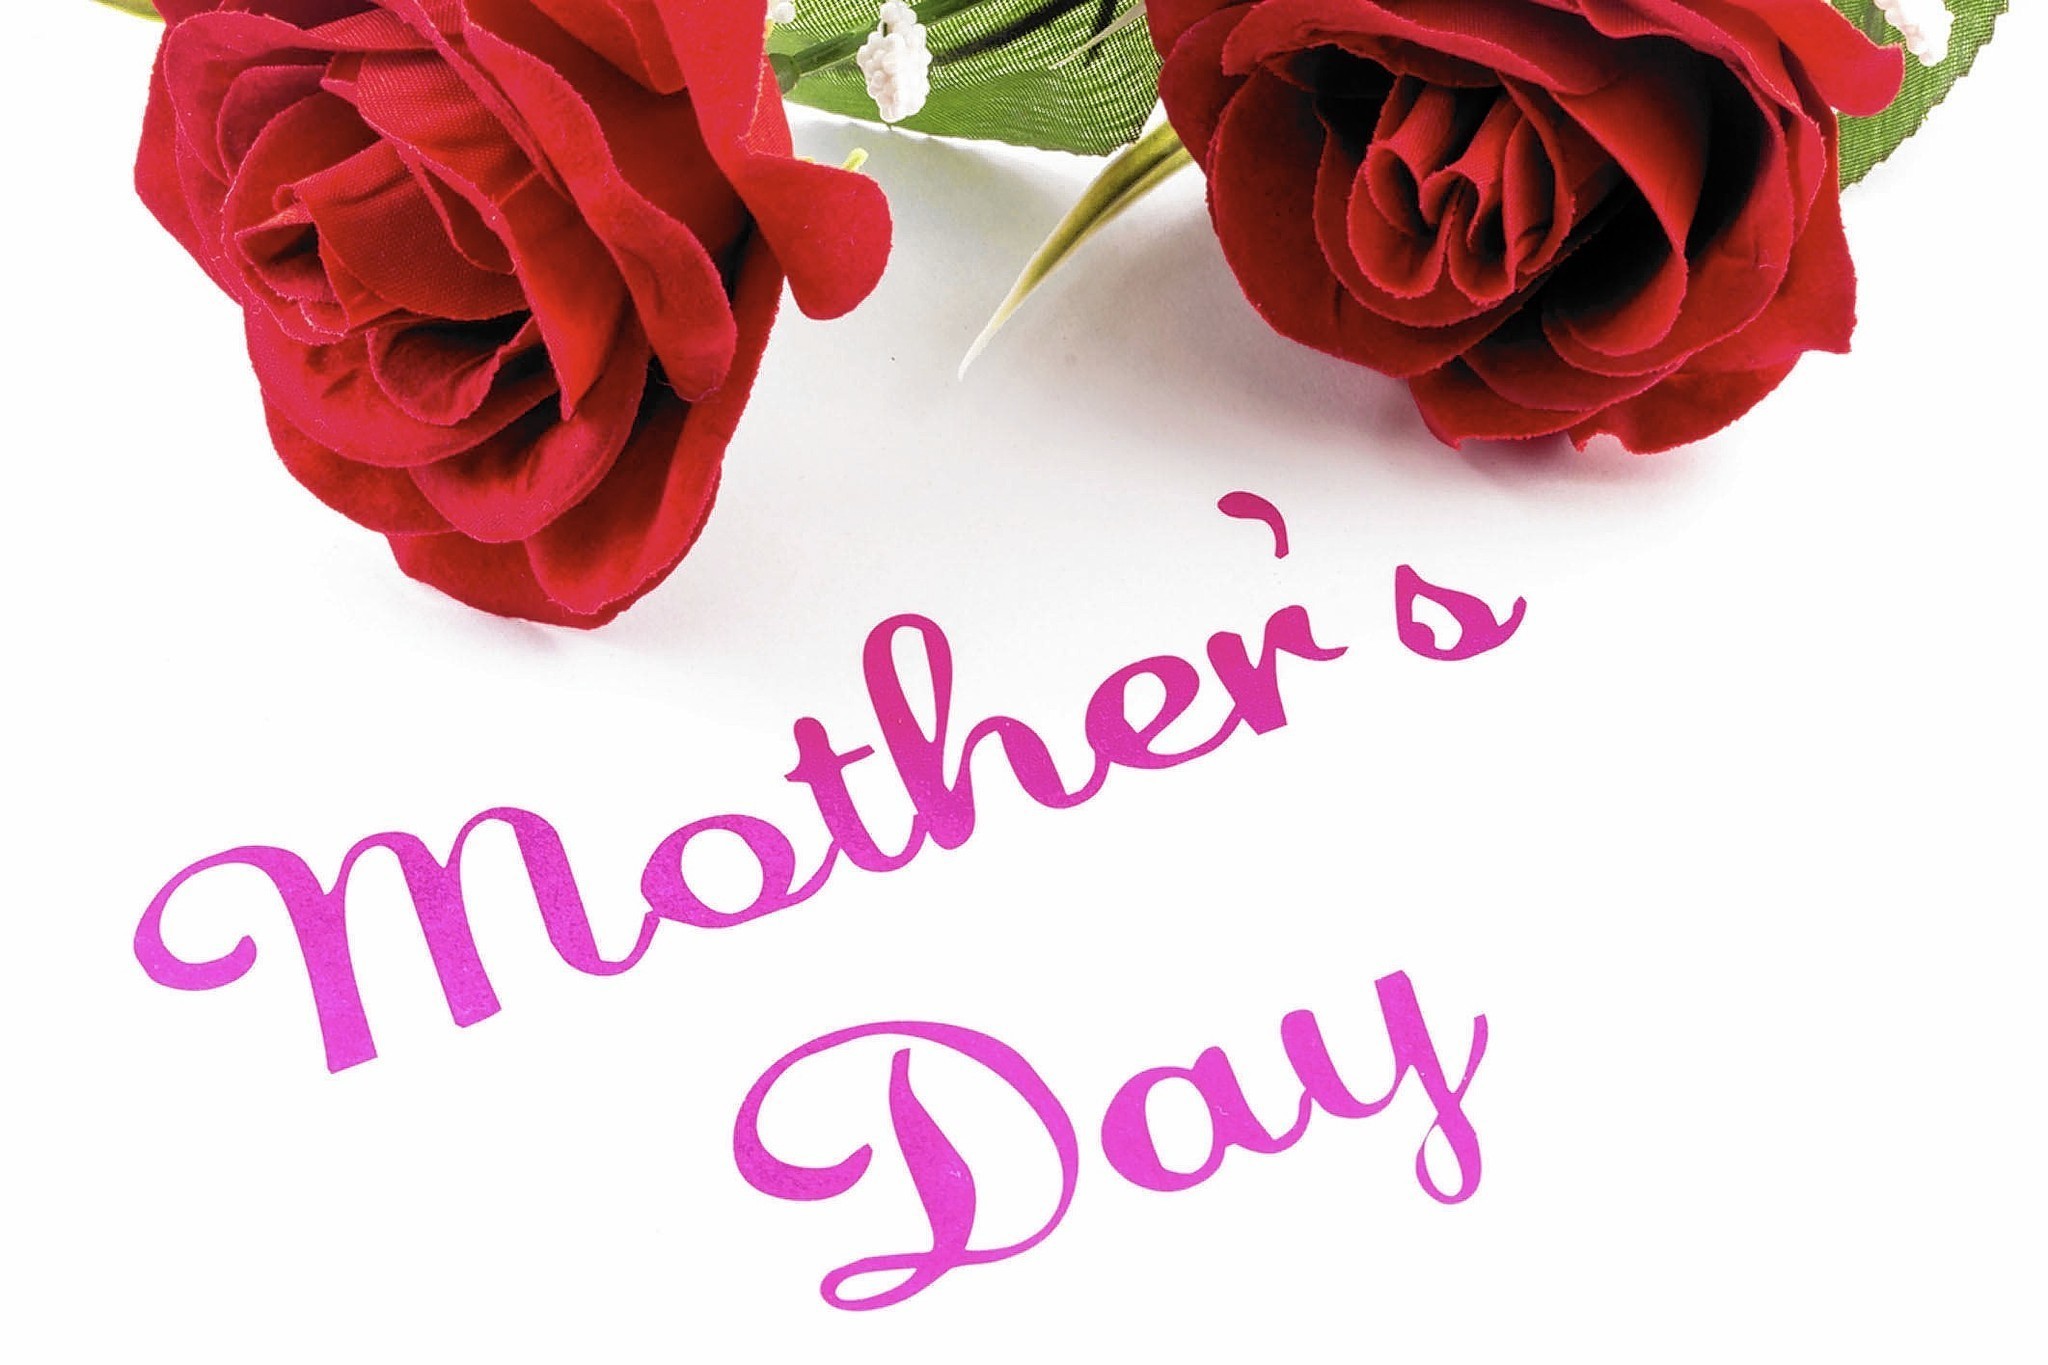 Mothers Day DP Images for Whatsapp - Profile Pic 4